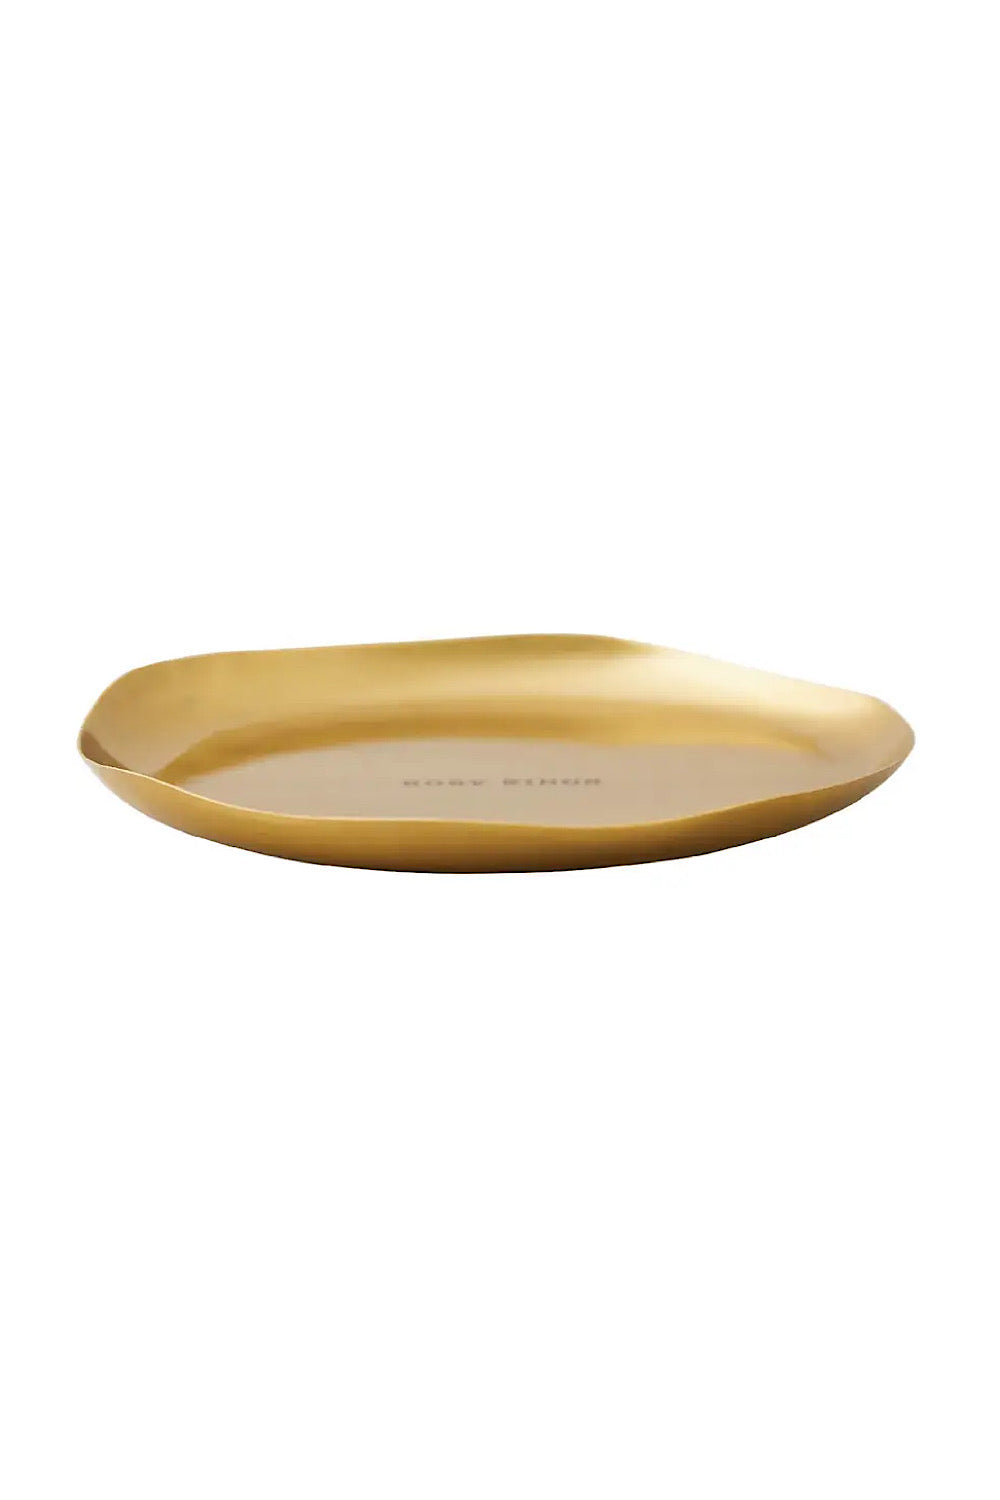 6” ROUND GOLD CANDLE PLATE